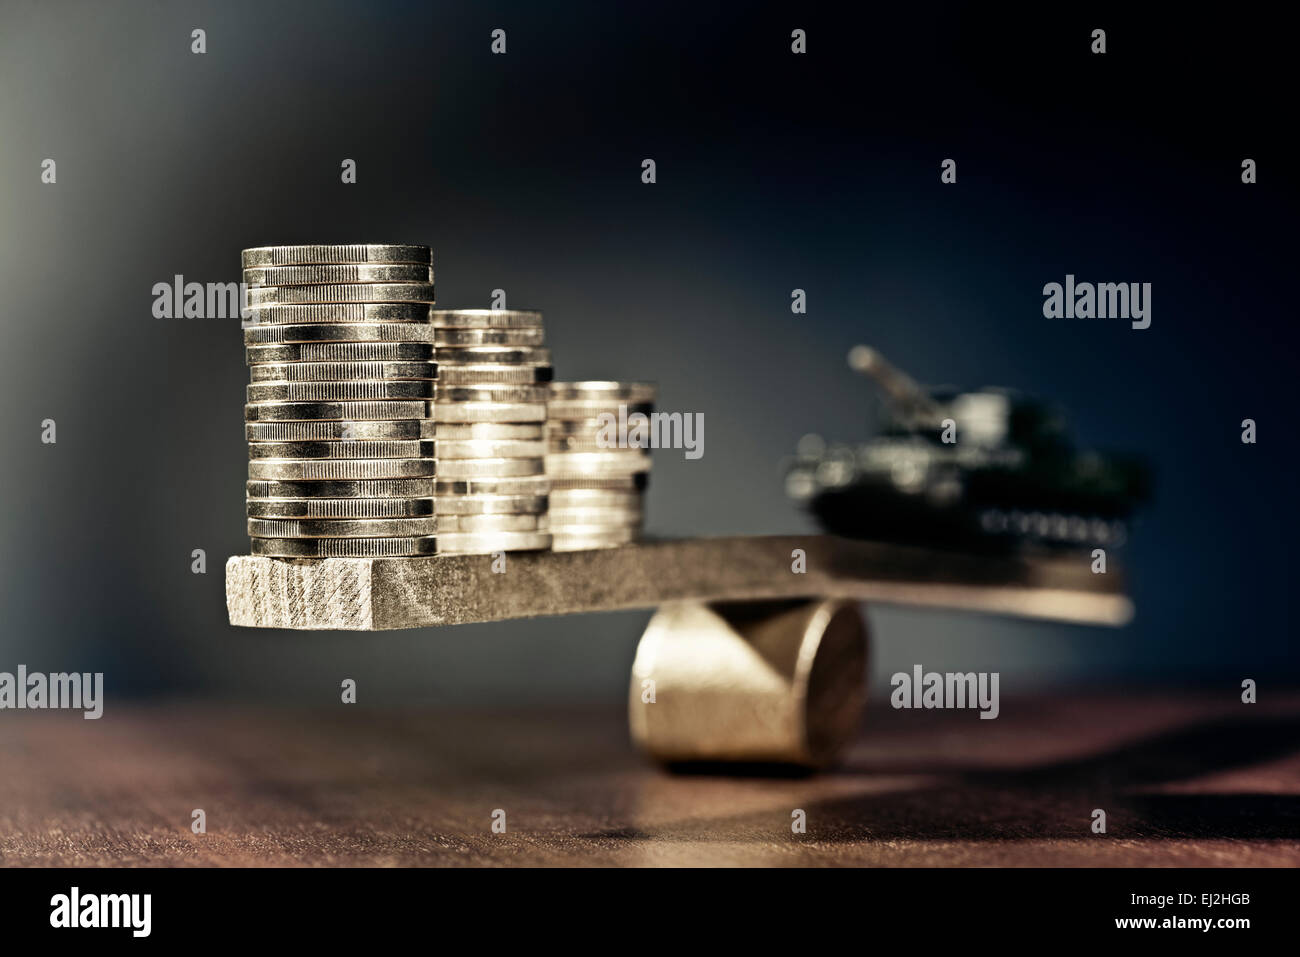 Seesaw with stacks of coins on one side and a tank on the other side. Stock Photo